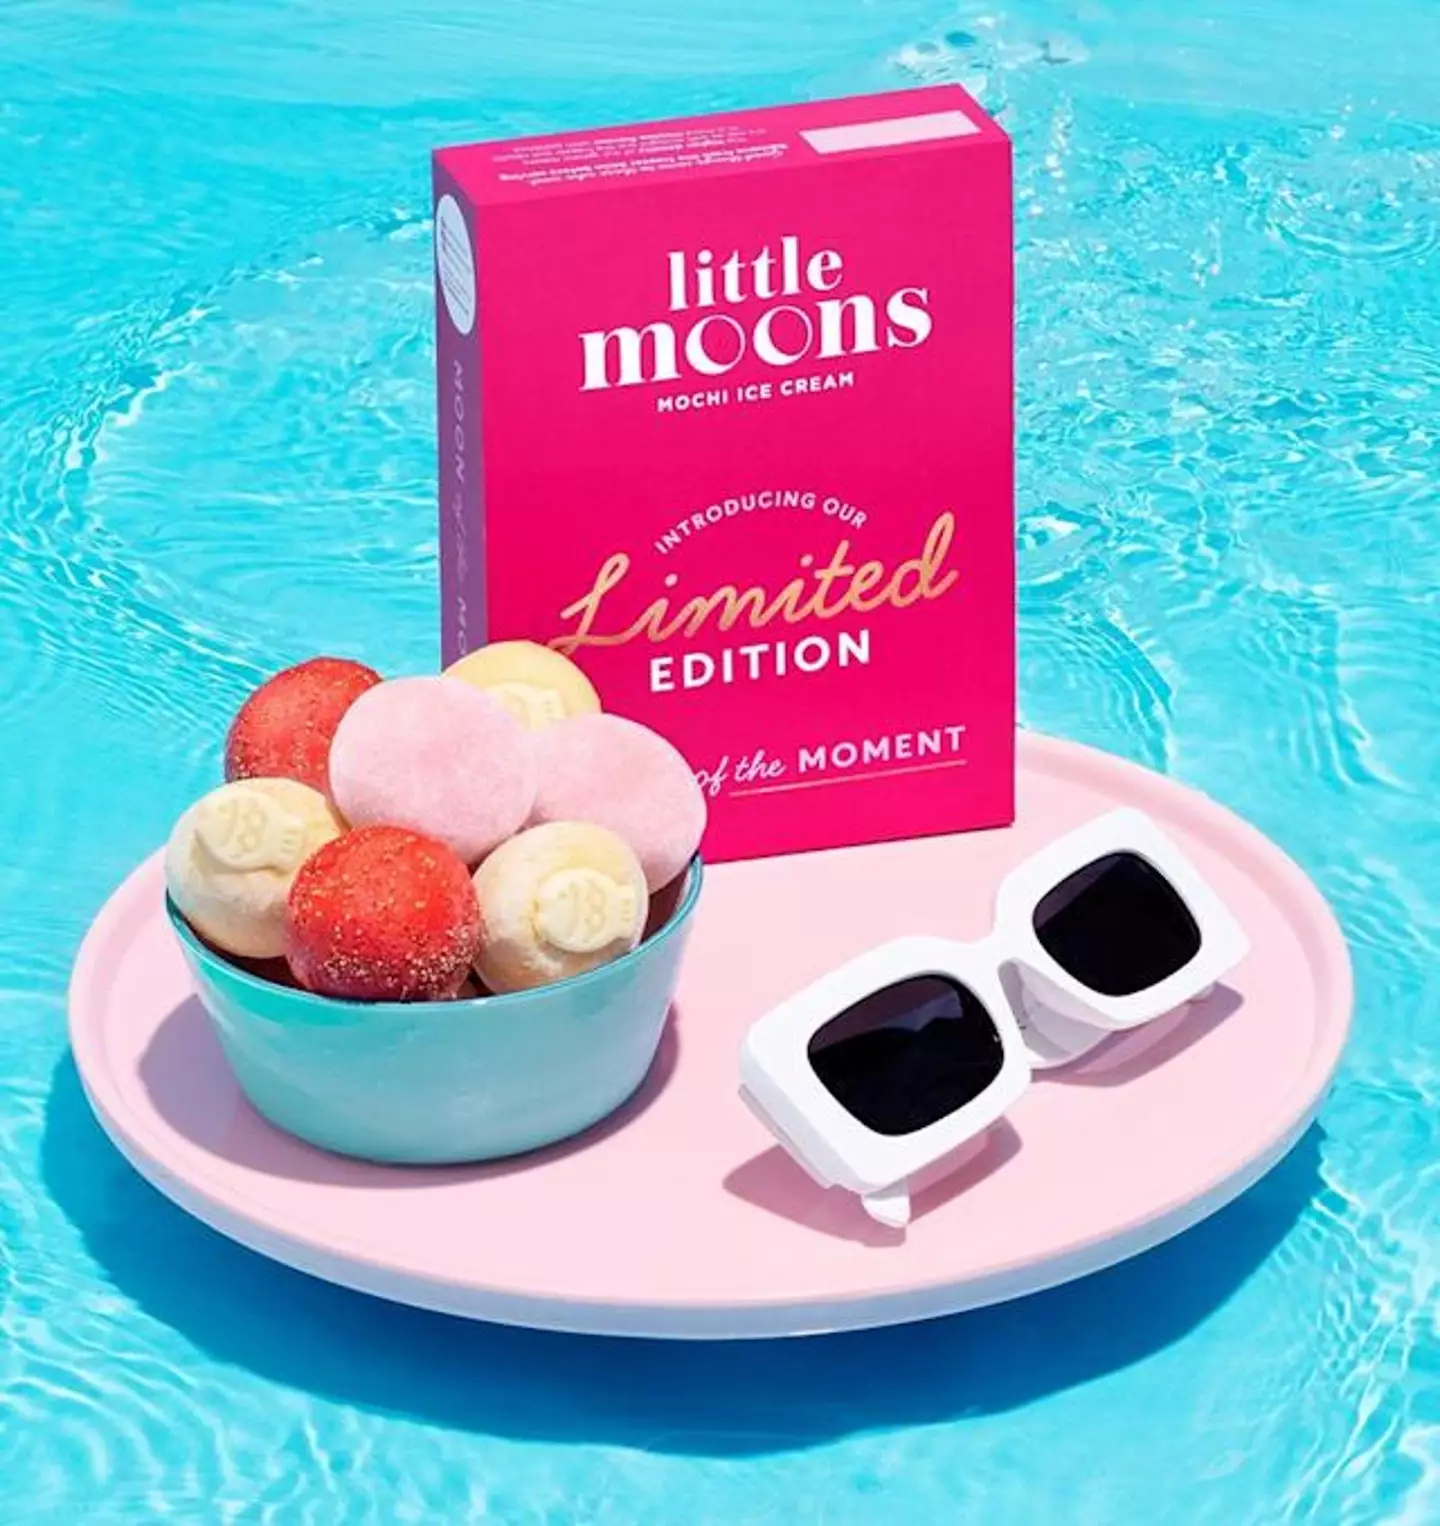 Little Moons has launched three new flavours inspired by British summer (